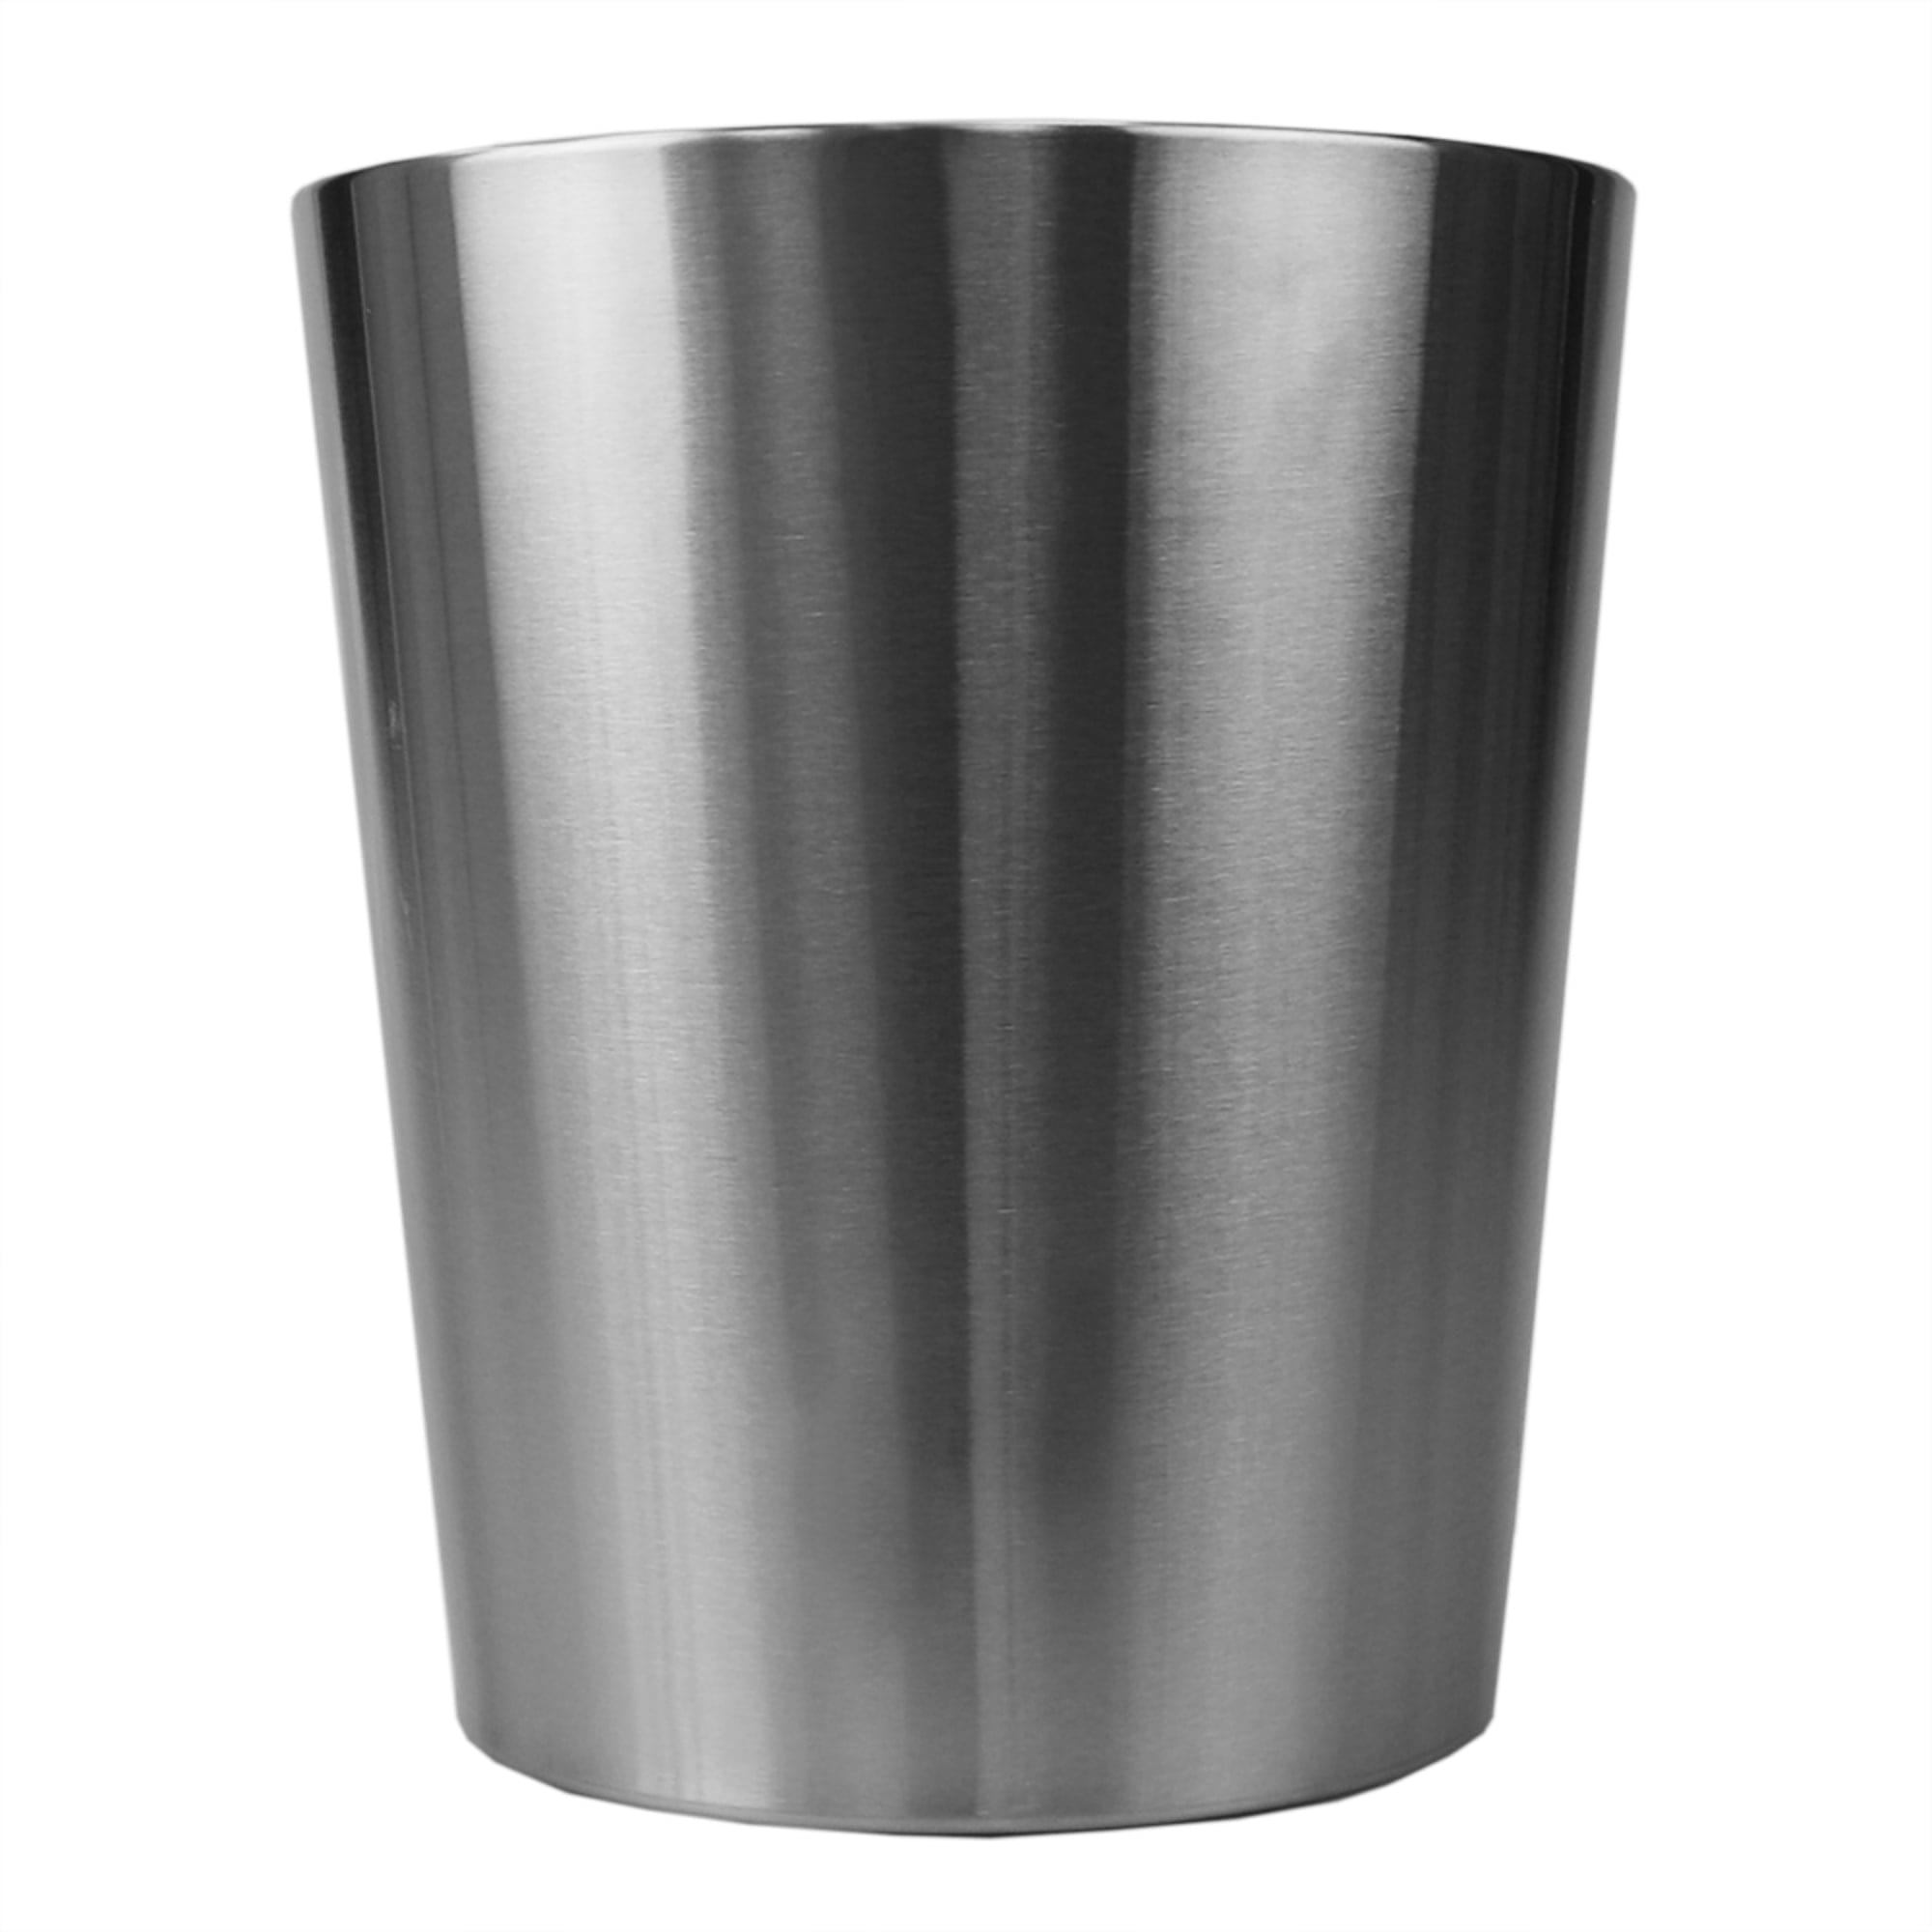 Home Basics Tapered 6 Lt Stainless Steel Waste Bin, Silver $6 EACH, CASE PACK OF 6